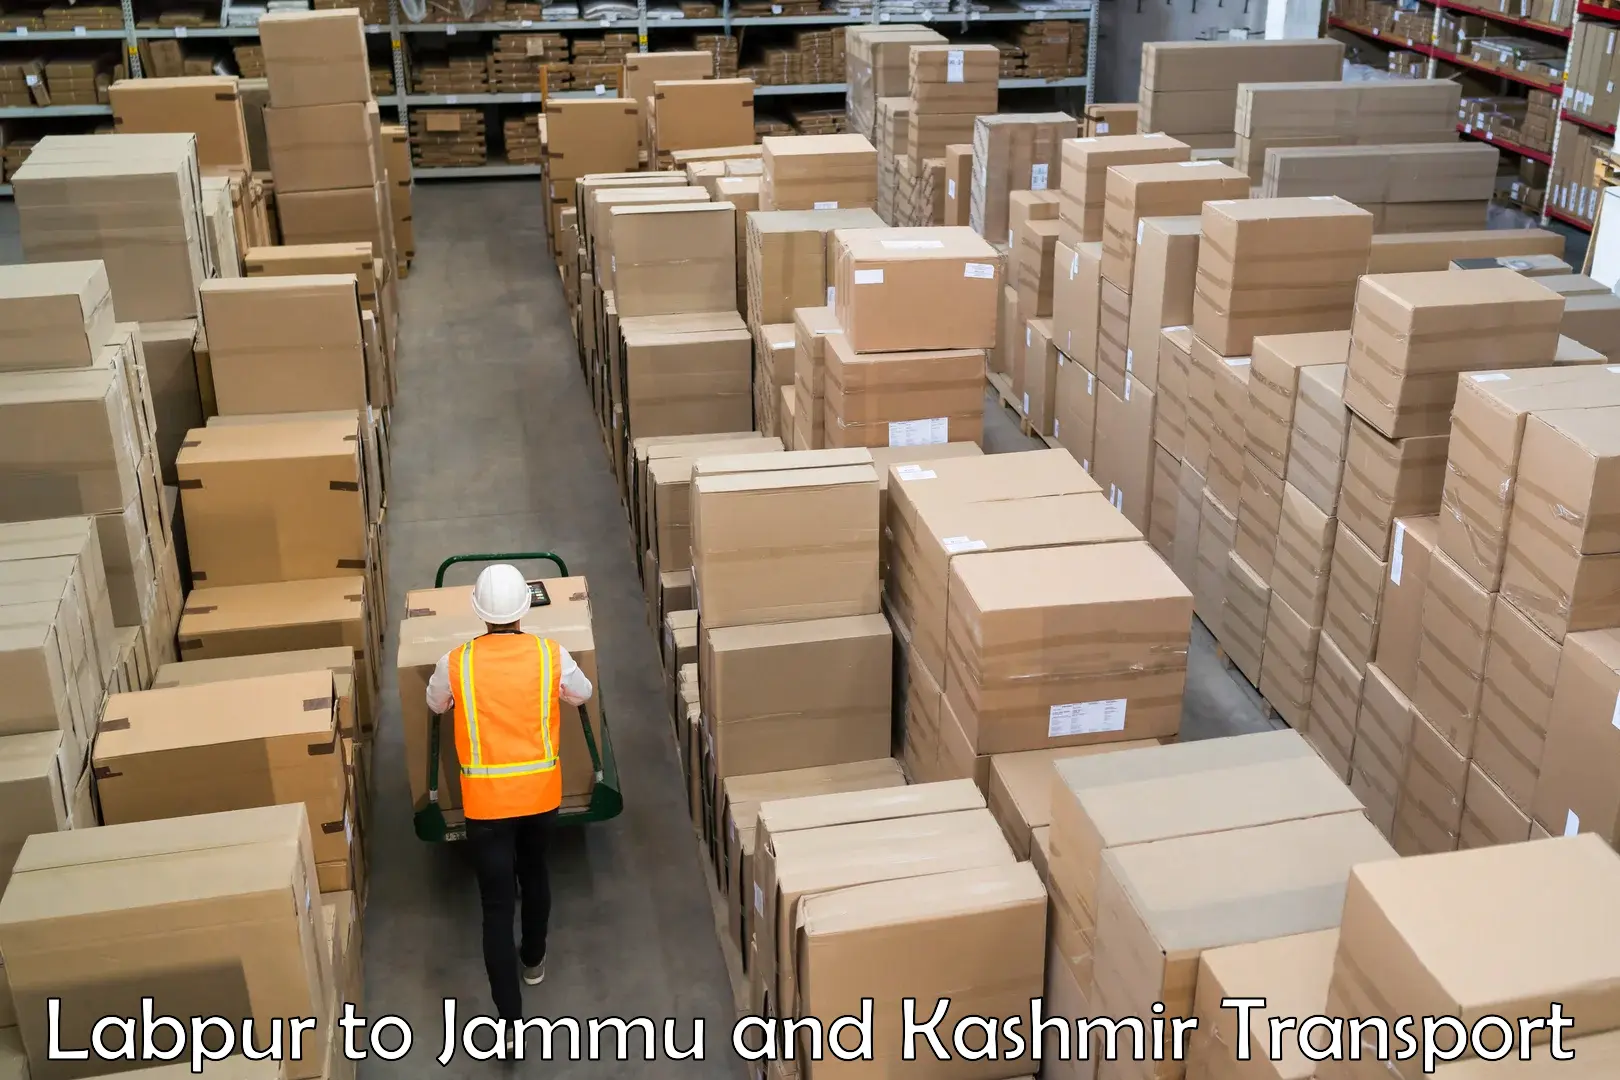 Transport in sharing Labpur to Jammu and Kashmir